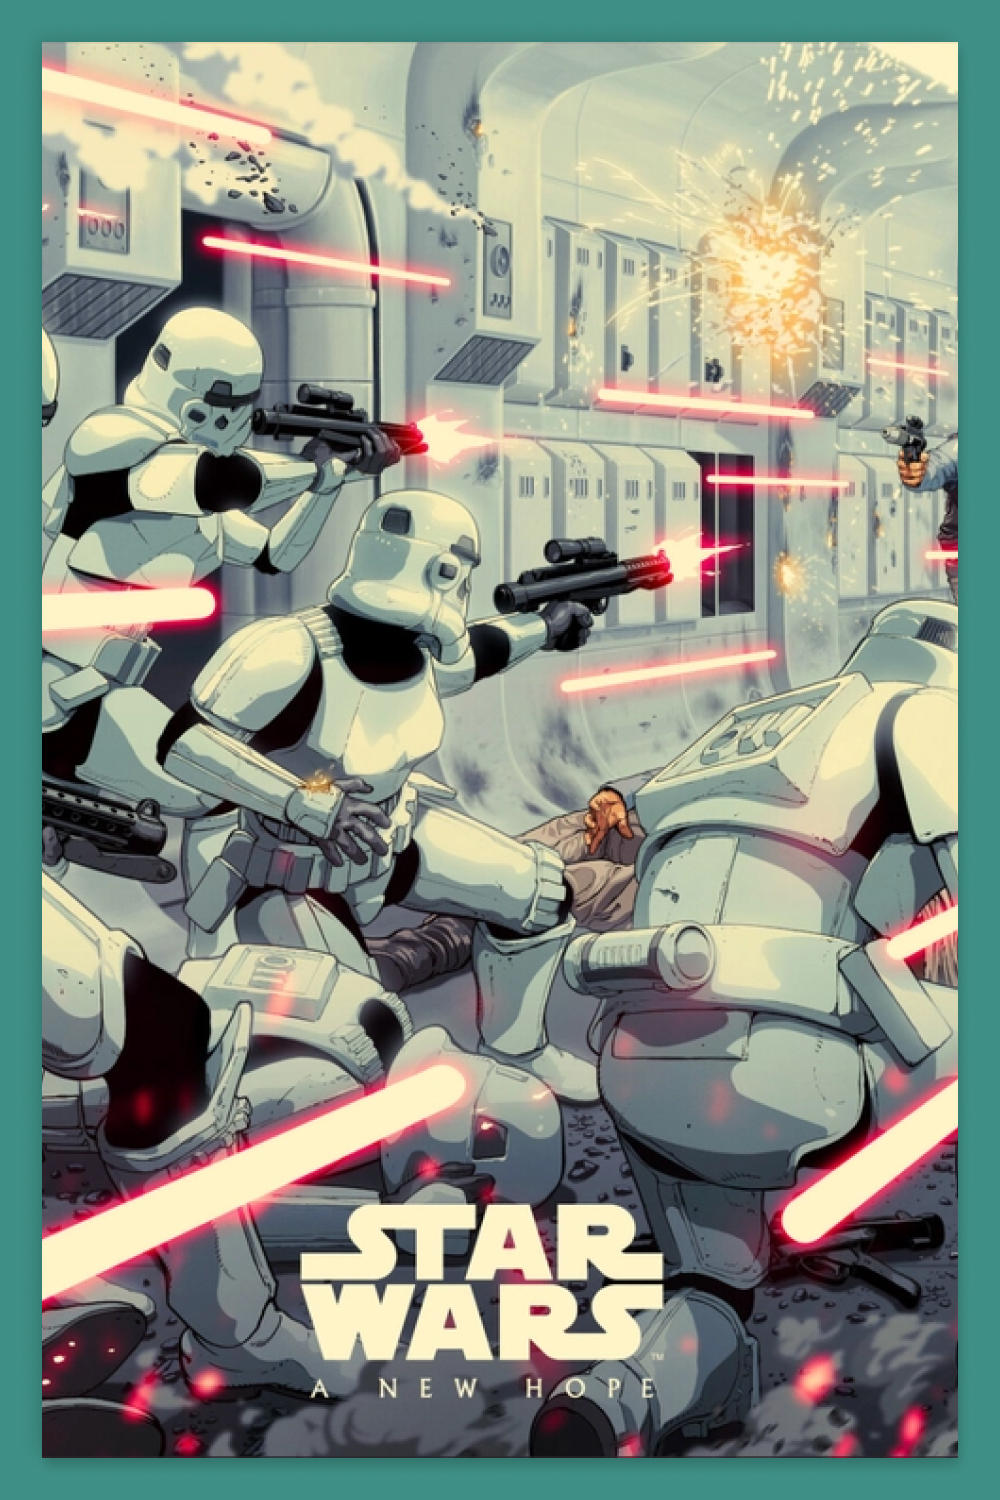 Star Wars A New Hope poster with troopers.